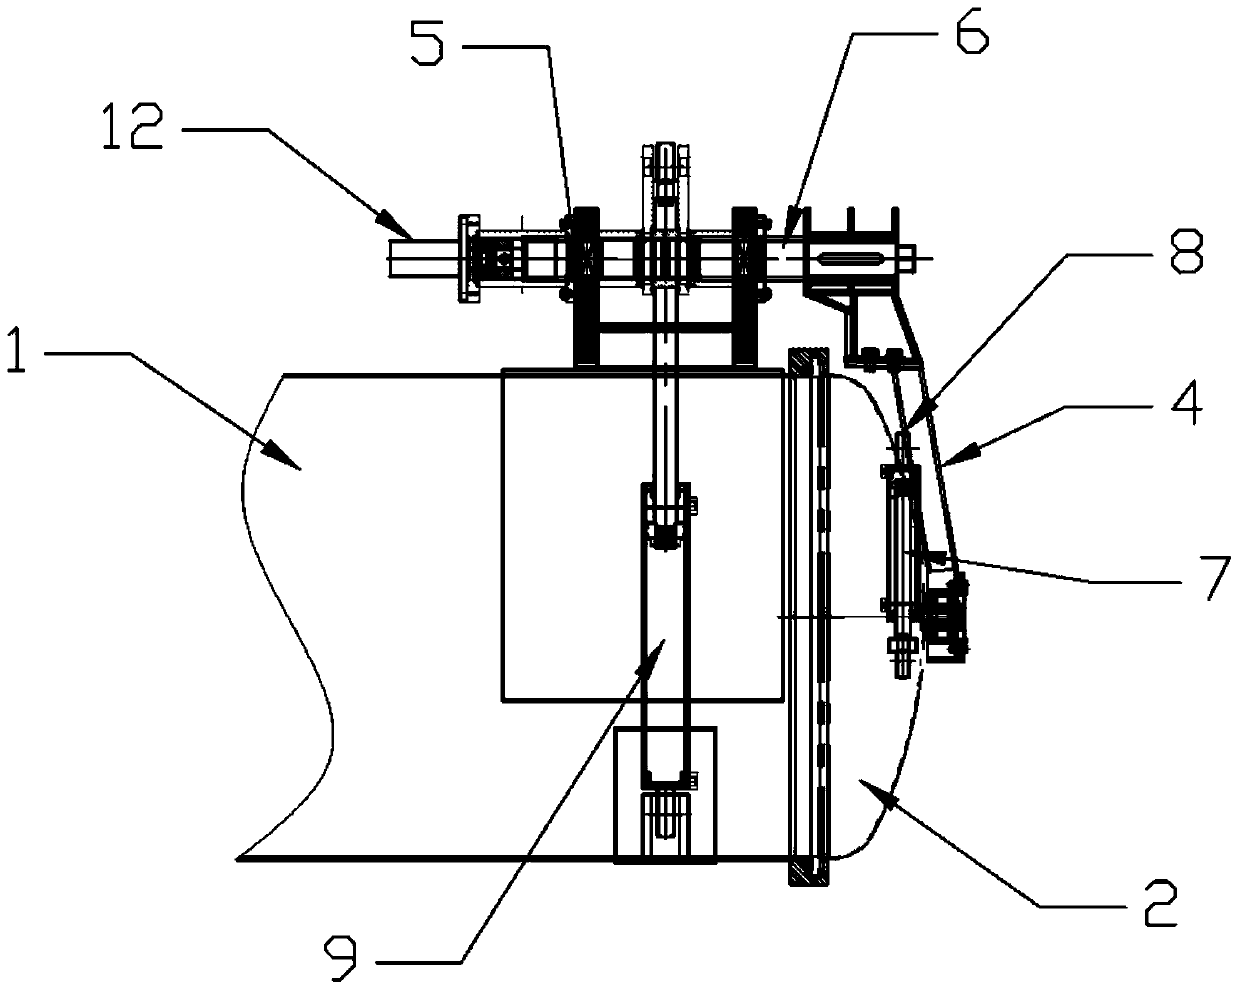 Rapid opening device for puffing equipment